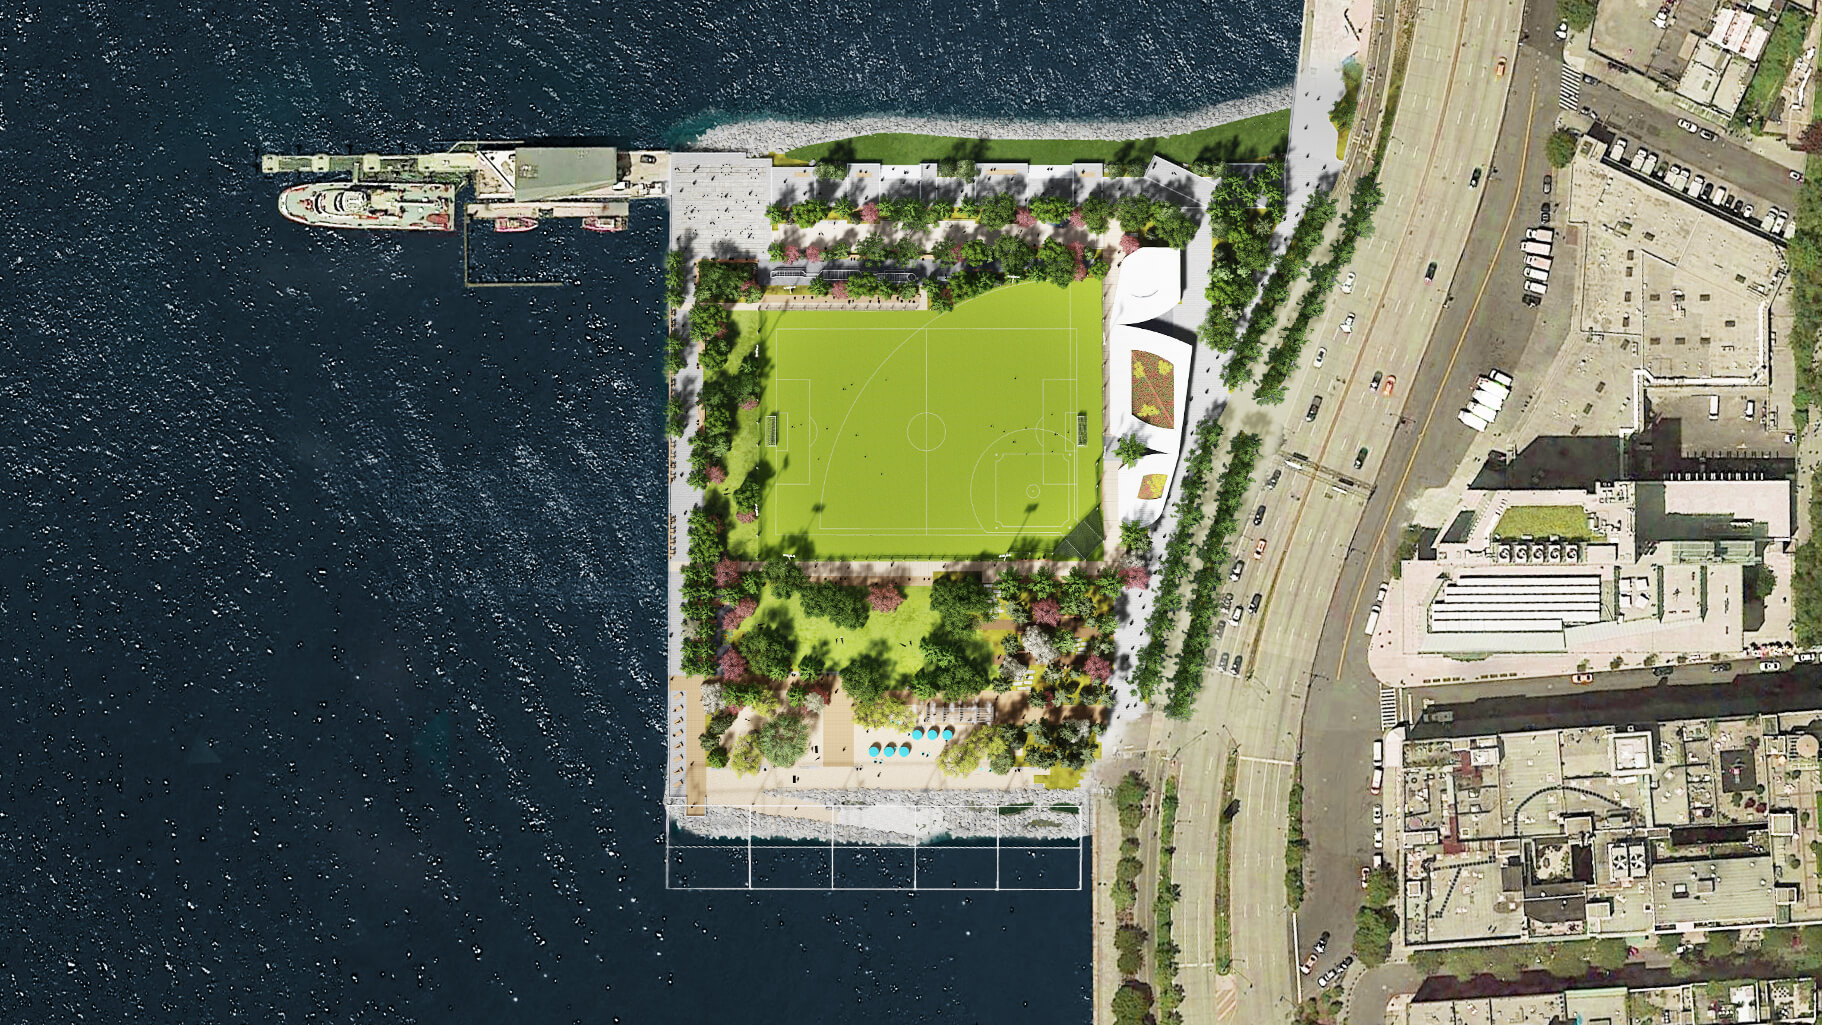 the new Gansevoort Peninsula in plan showing the beach and playing fields